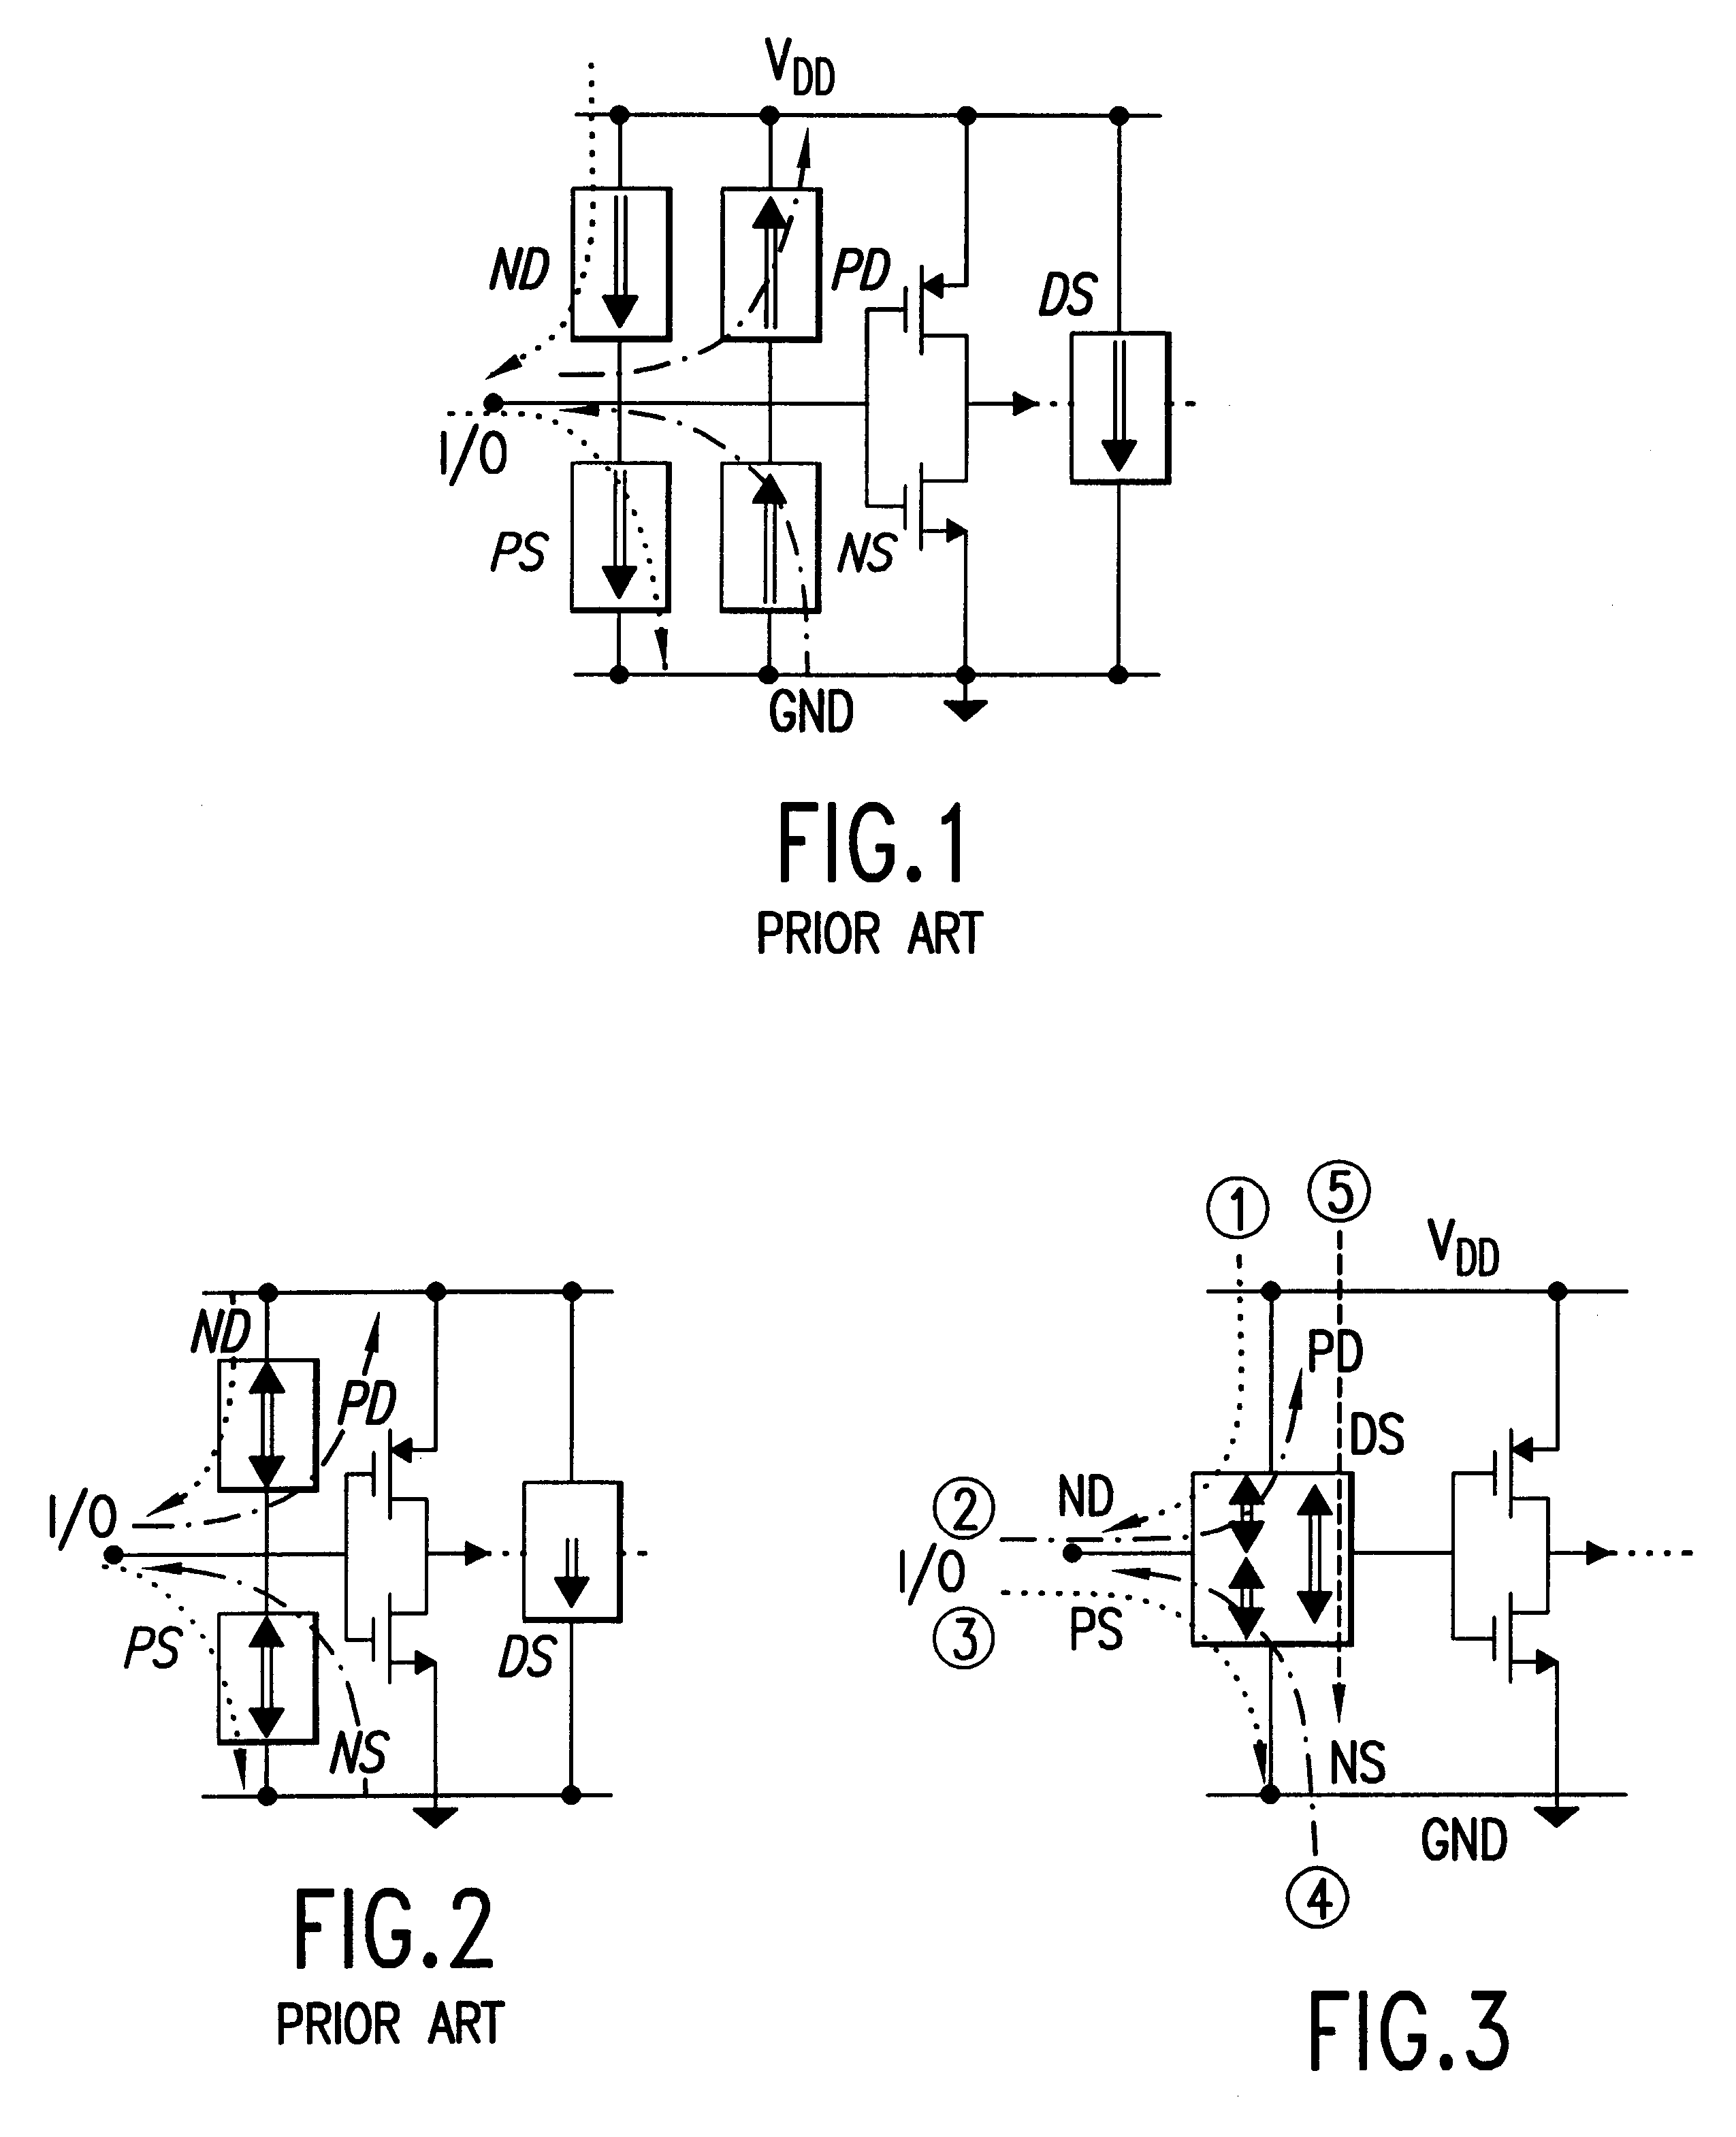 Single structure all-direction ESD protection for integrated circuits